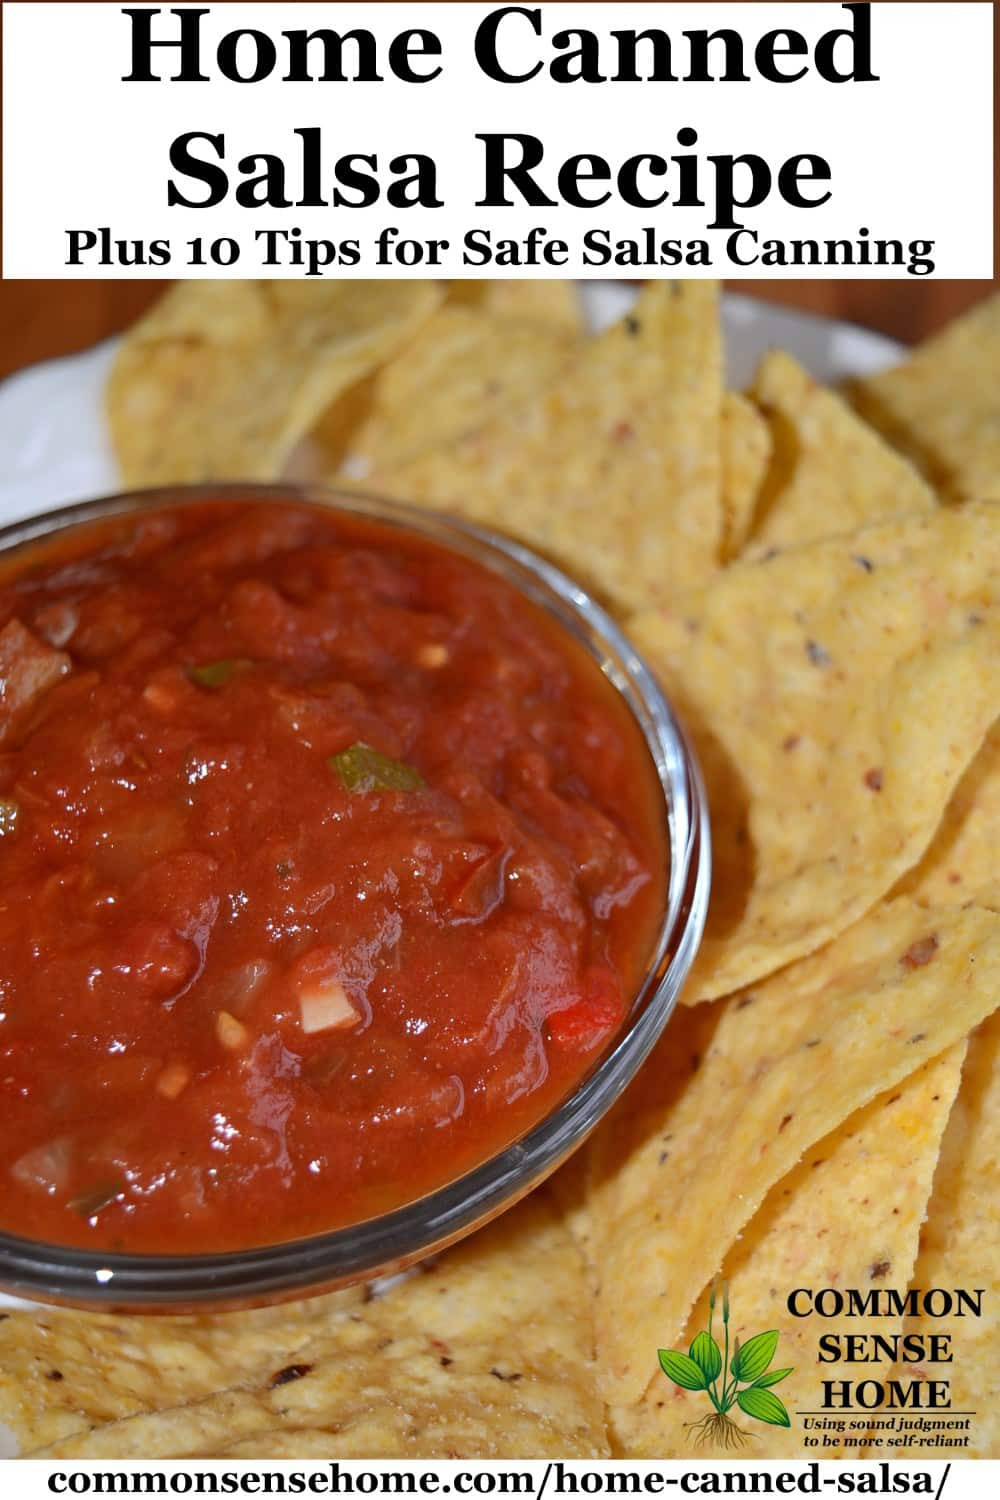 Home Canned Salsa Recipe
 Home Canned Salsa Recipe Plus 10 Tips for Canning Salsa